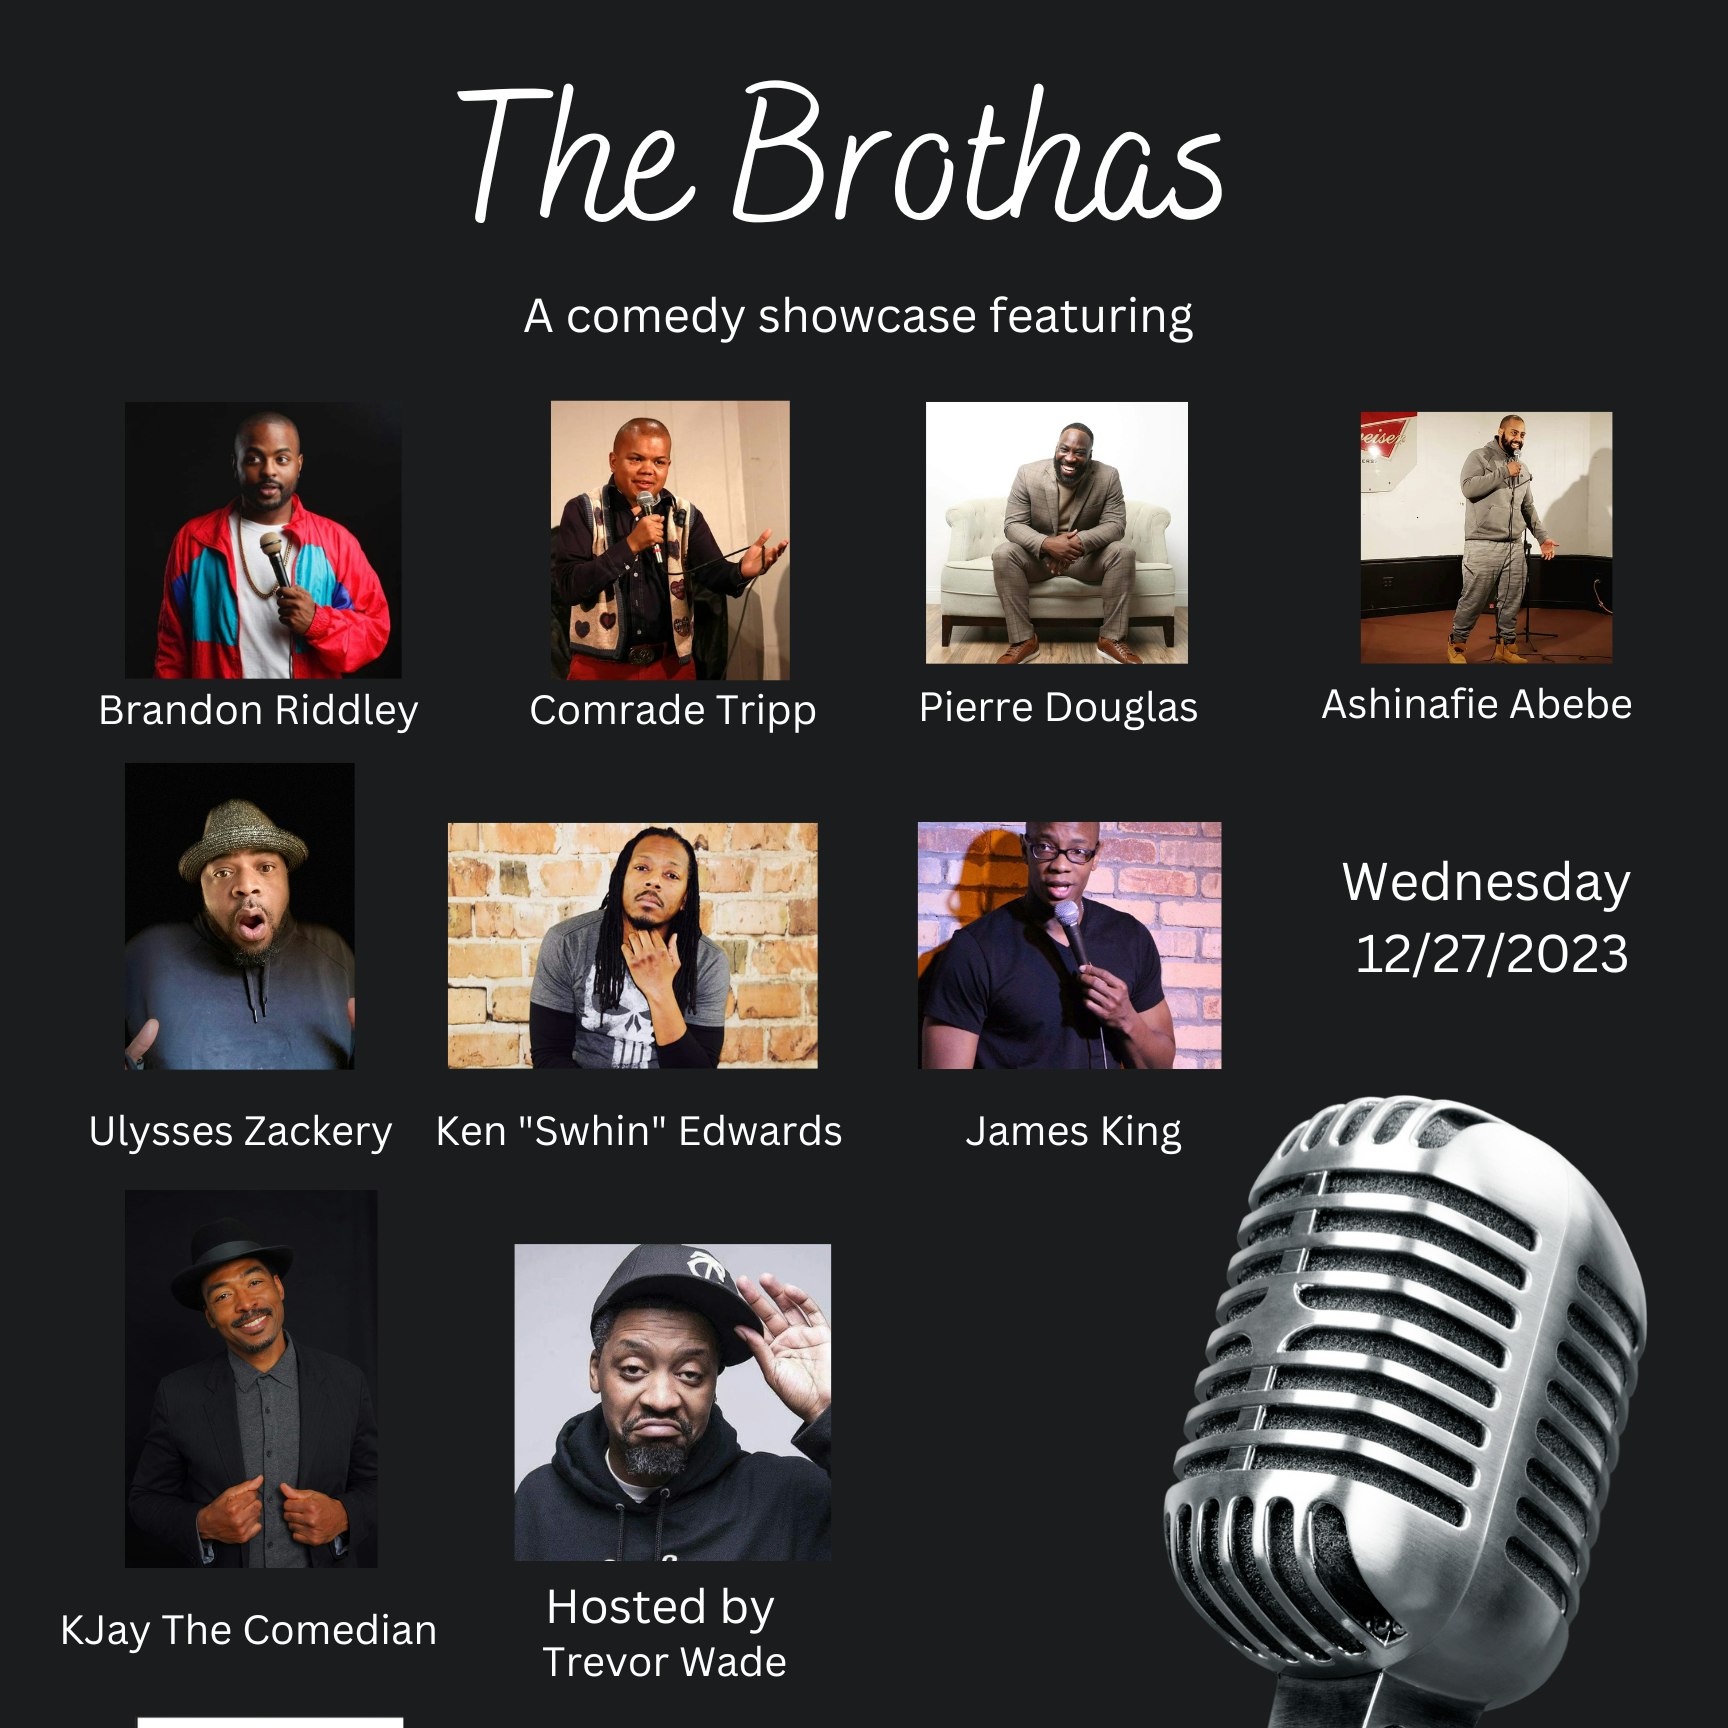 Wade N' the Water Ent Presents: The Brothas